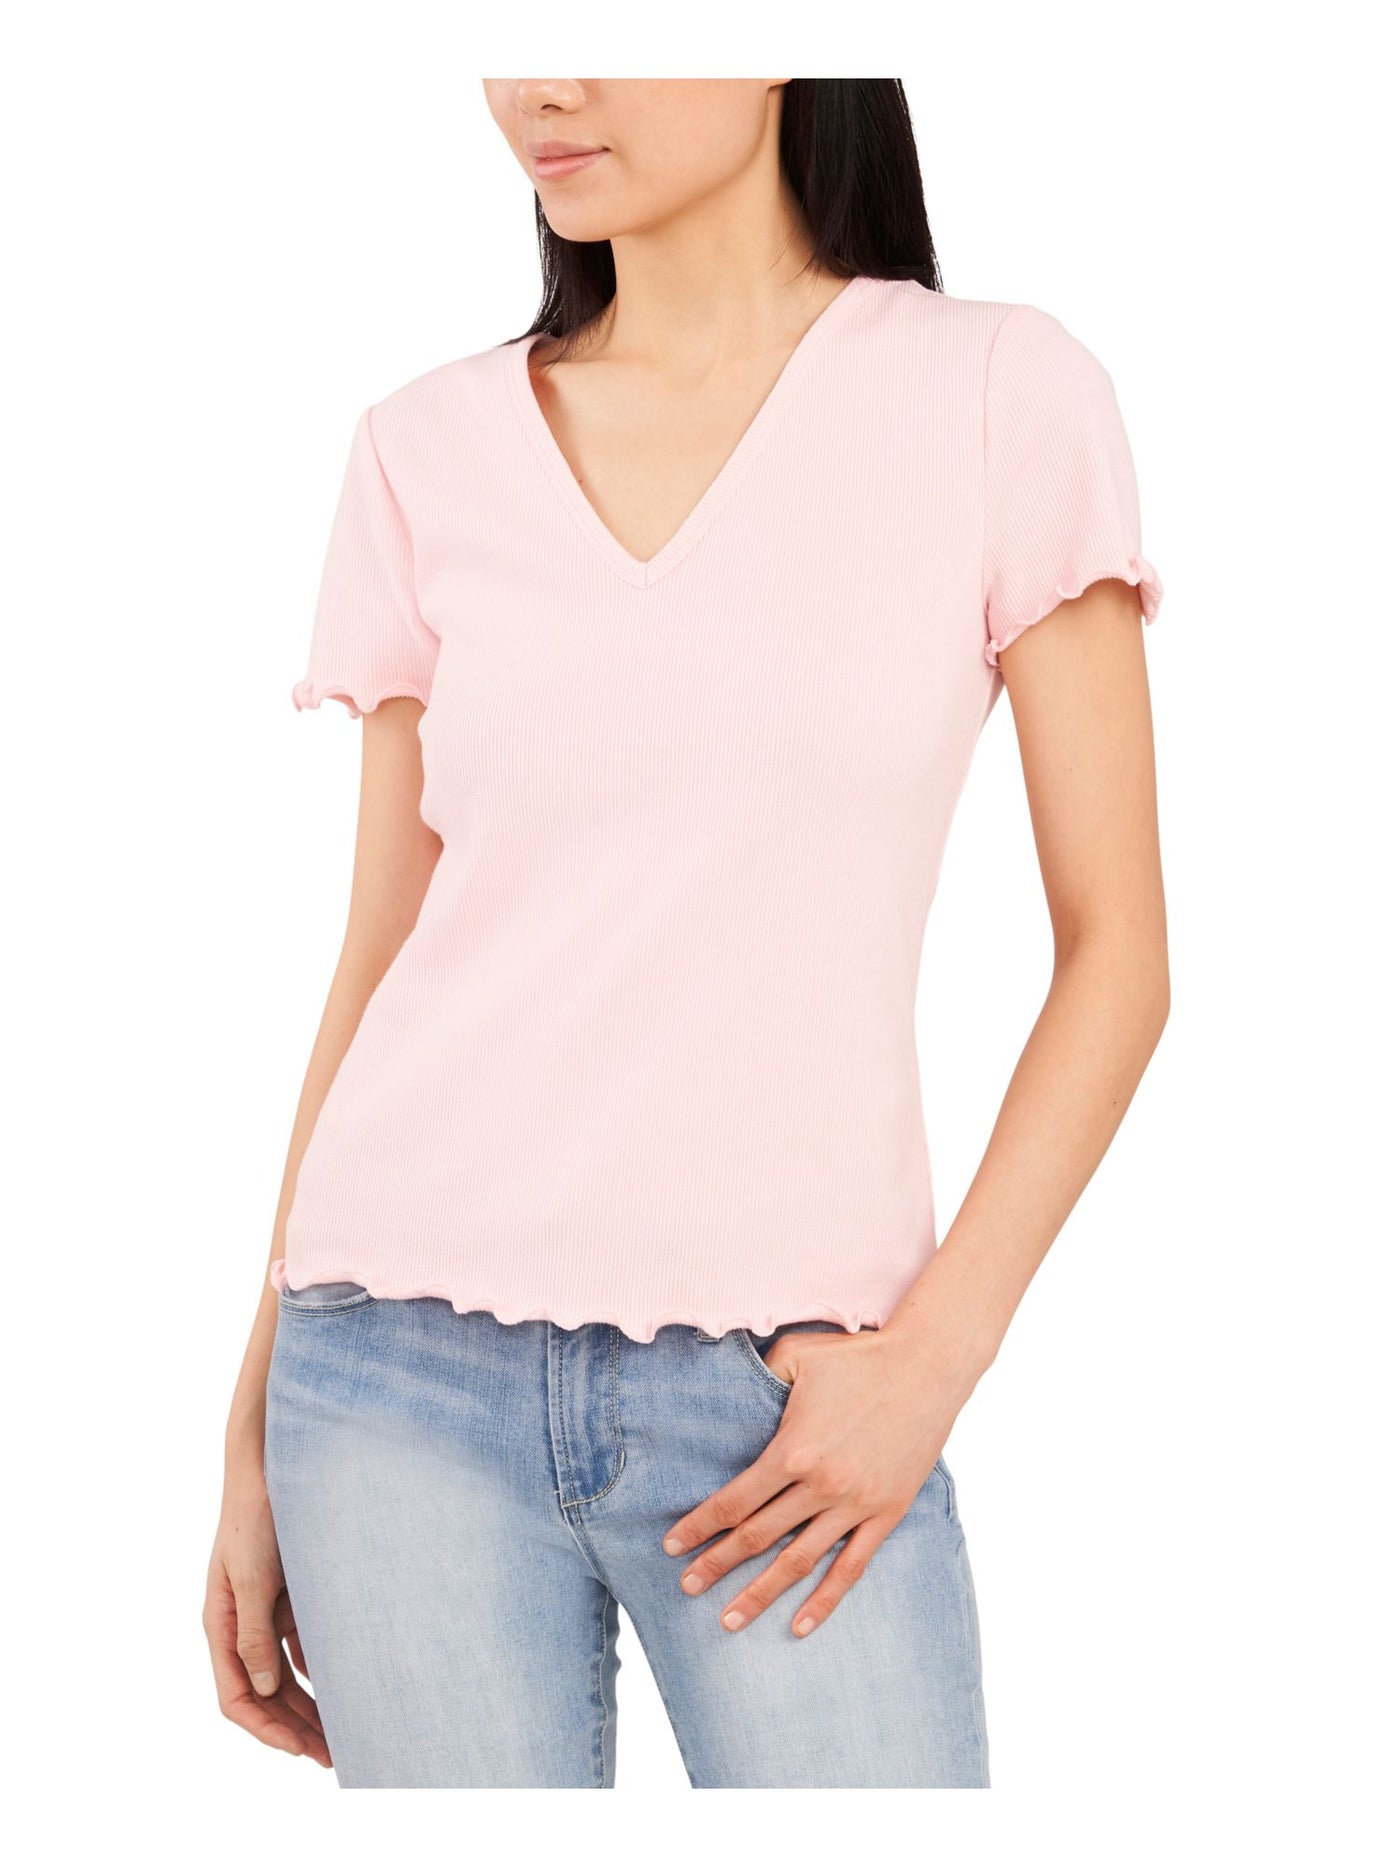 RILEY&RAE Womens Pink Stretch Crew Neck Top XS